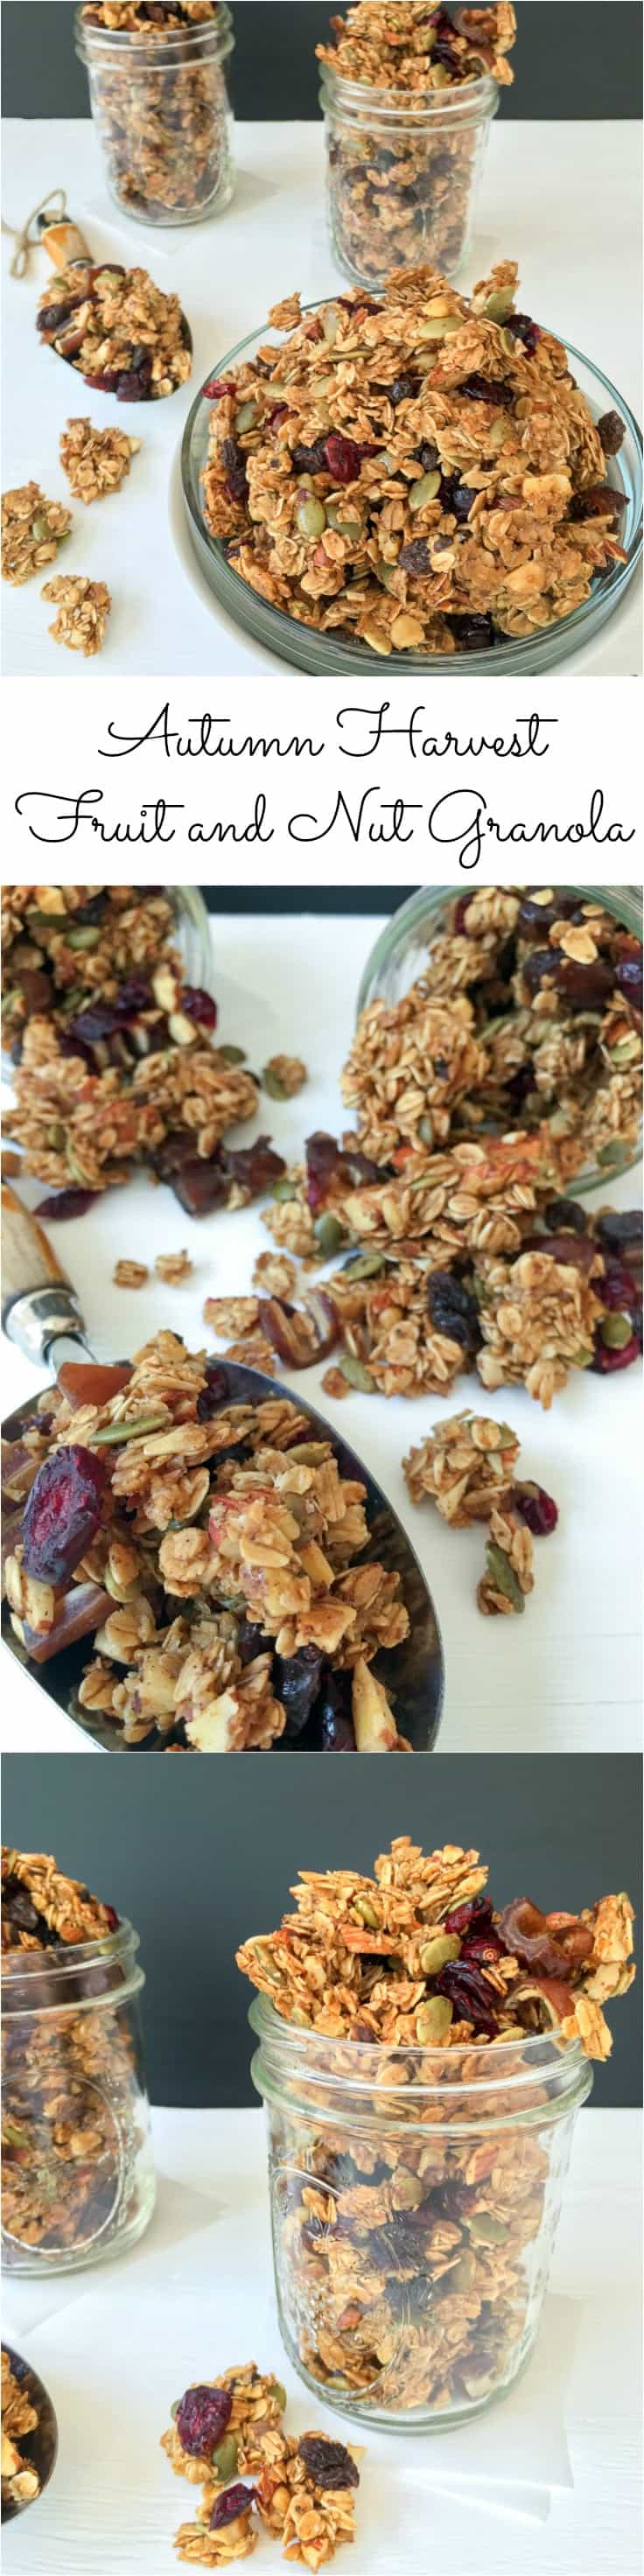 A close up photo of autumn harvest fruit and nut granola.